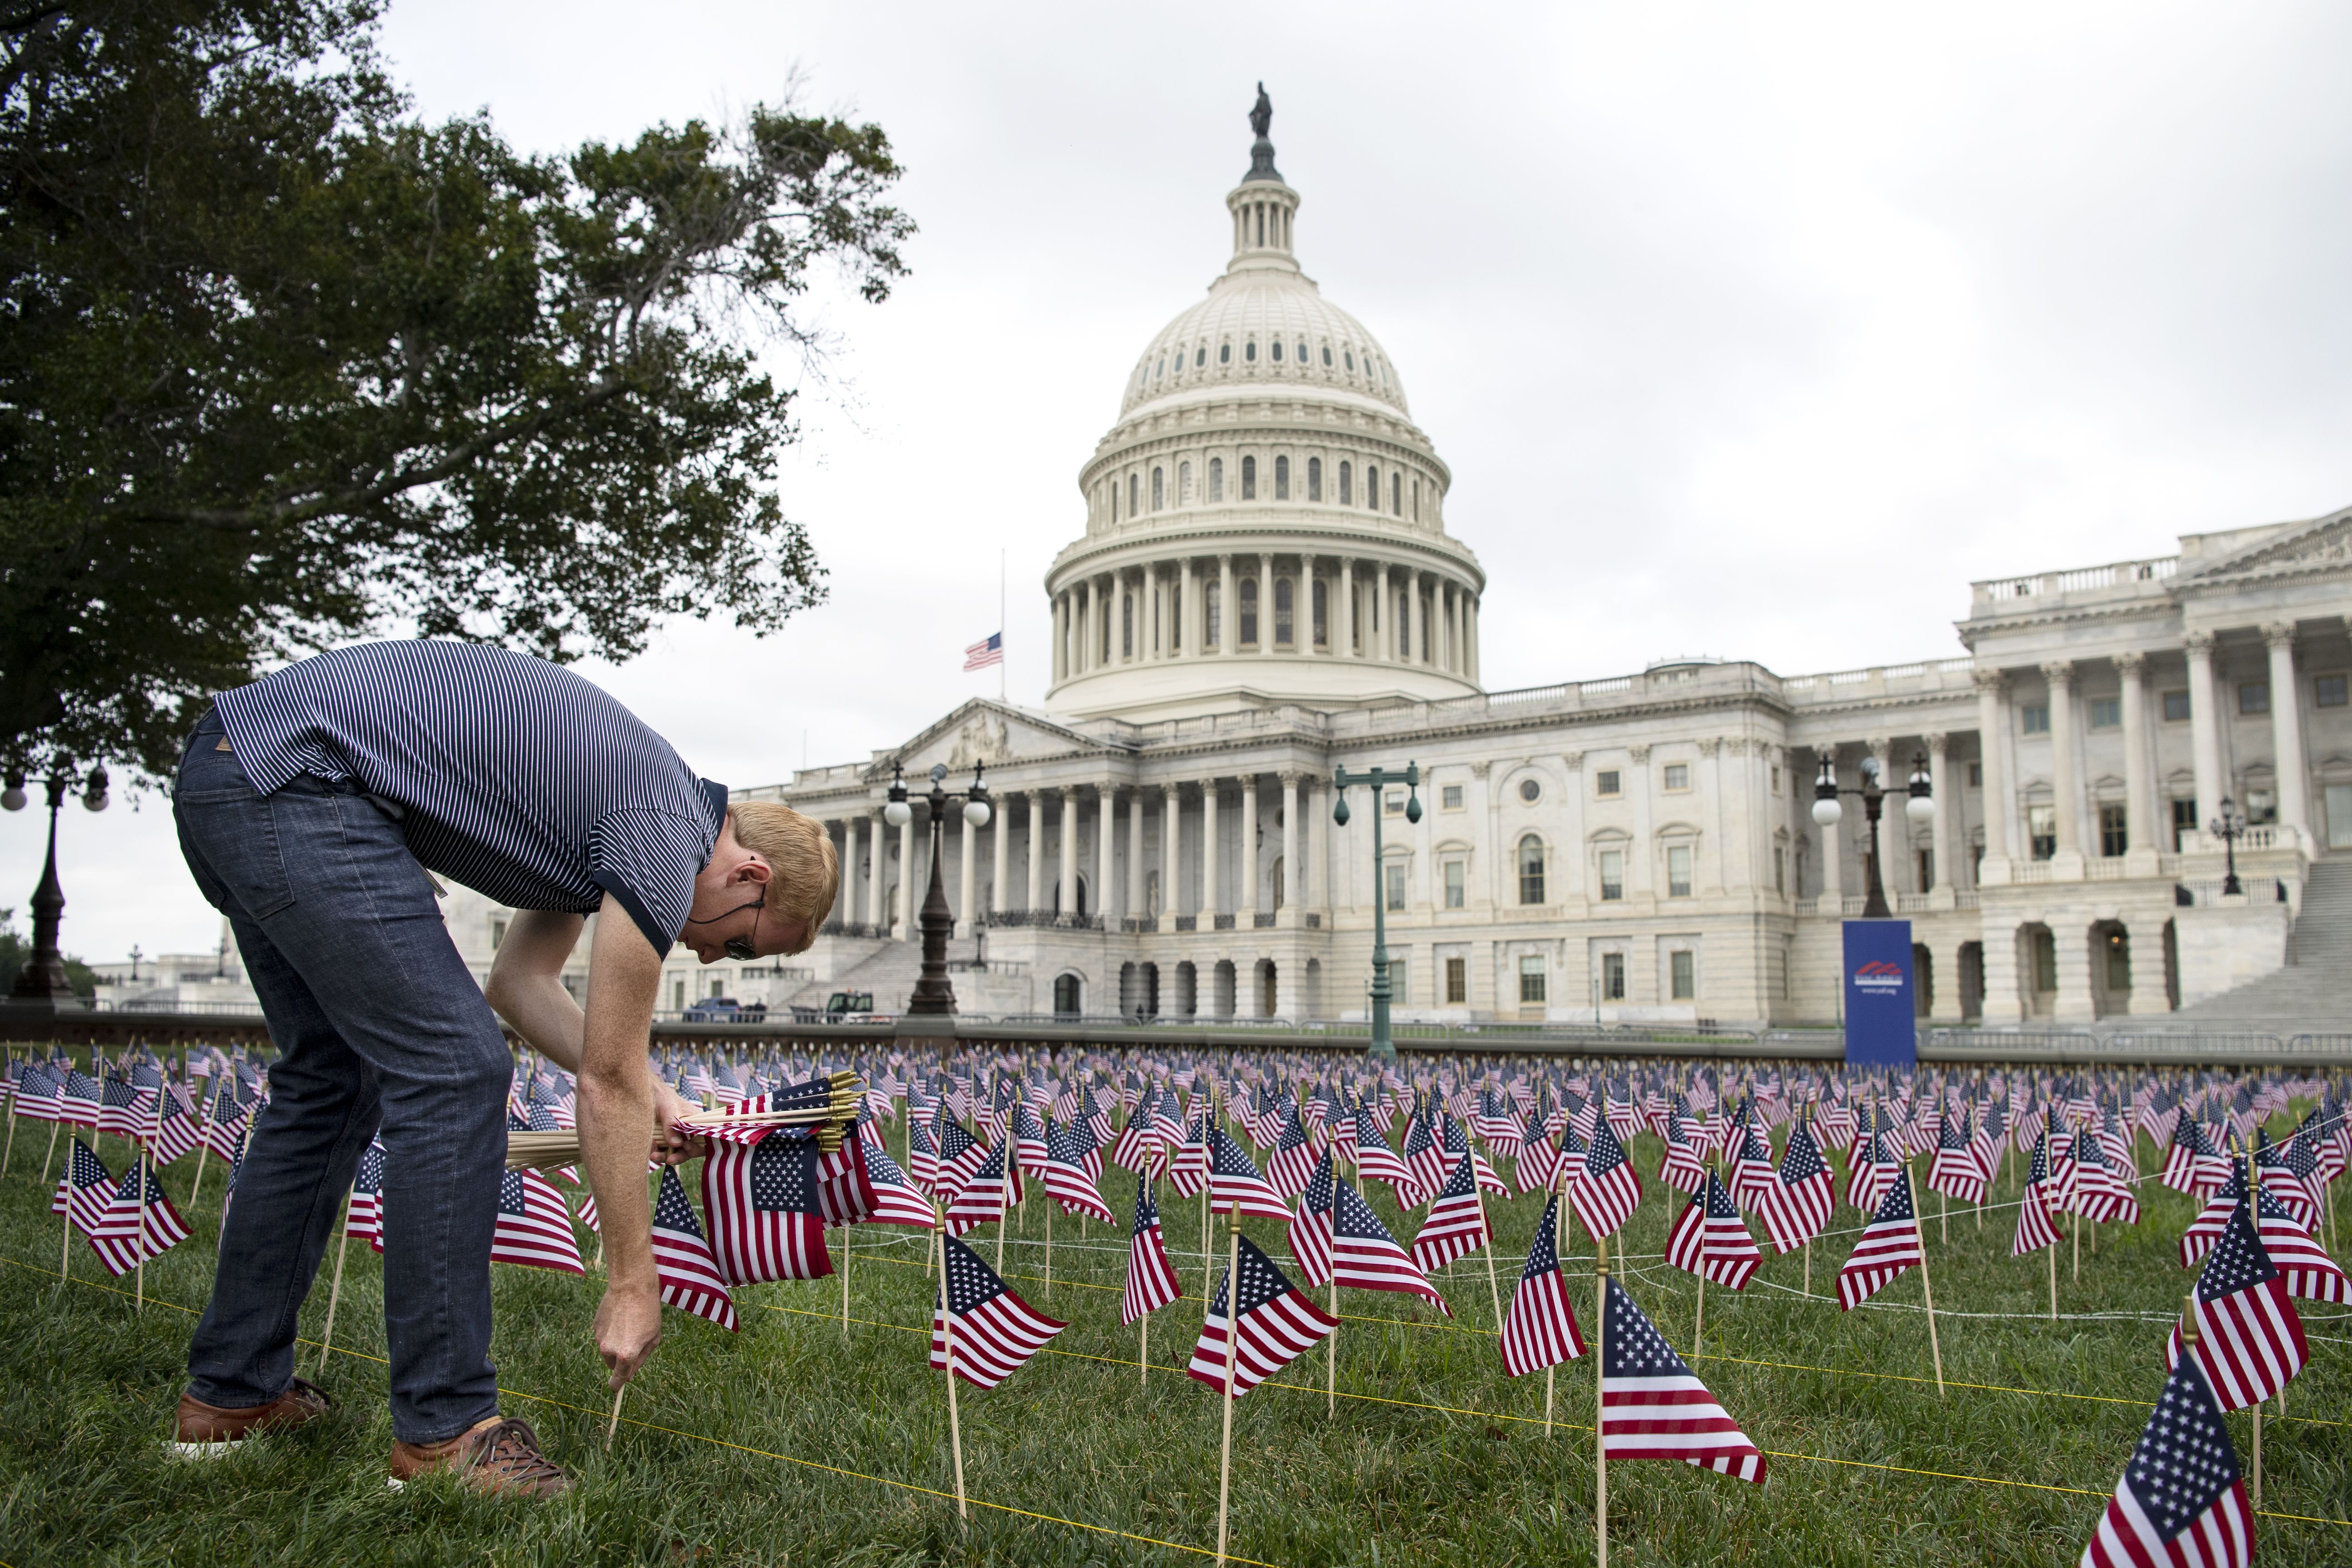 People place American flags to represent the lives lost during the 9/11 attacks, outside of the Capitol.